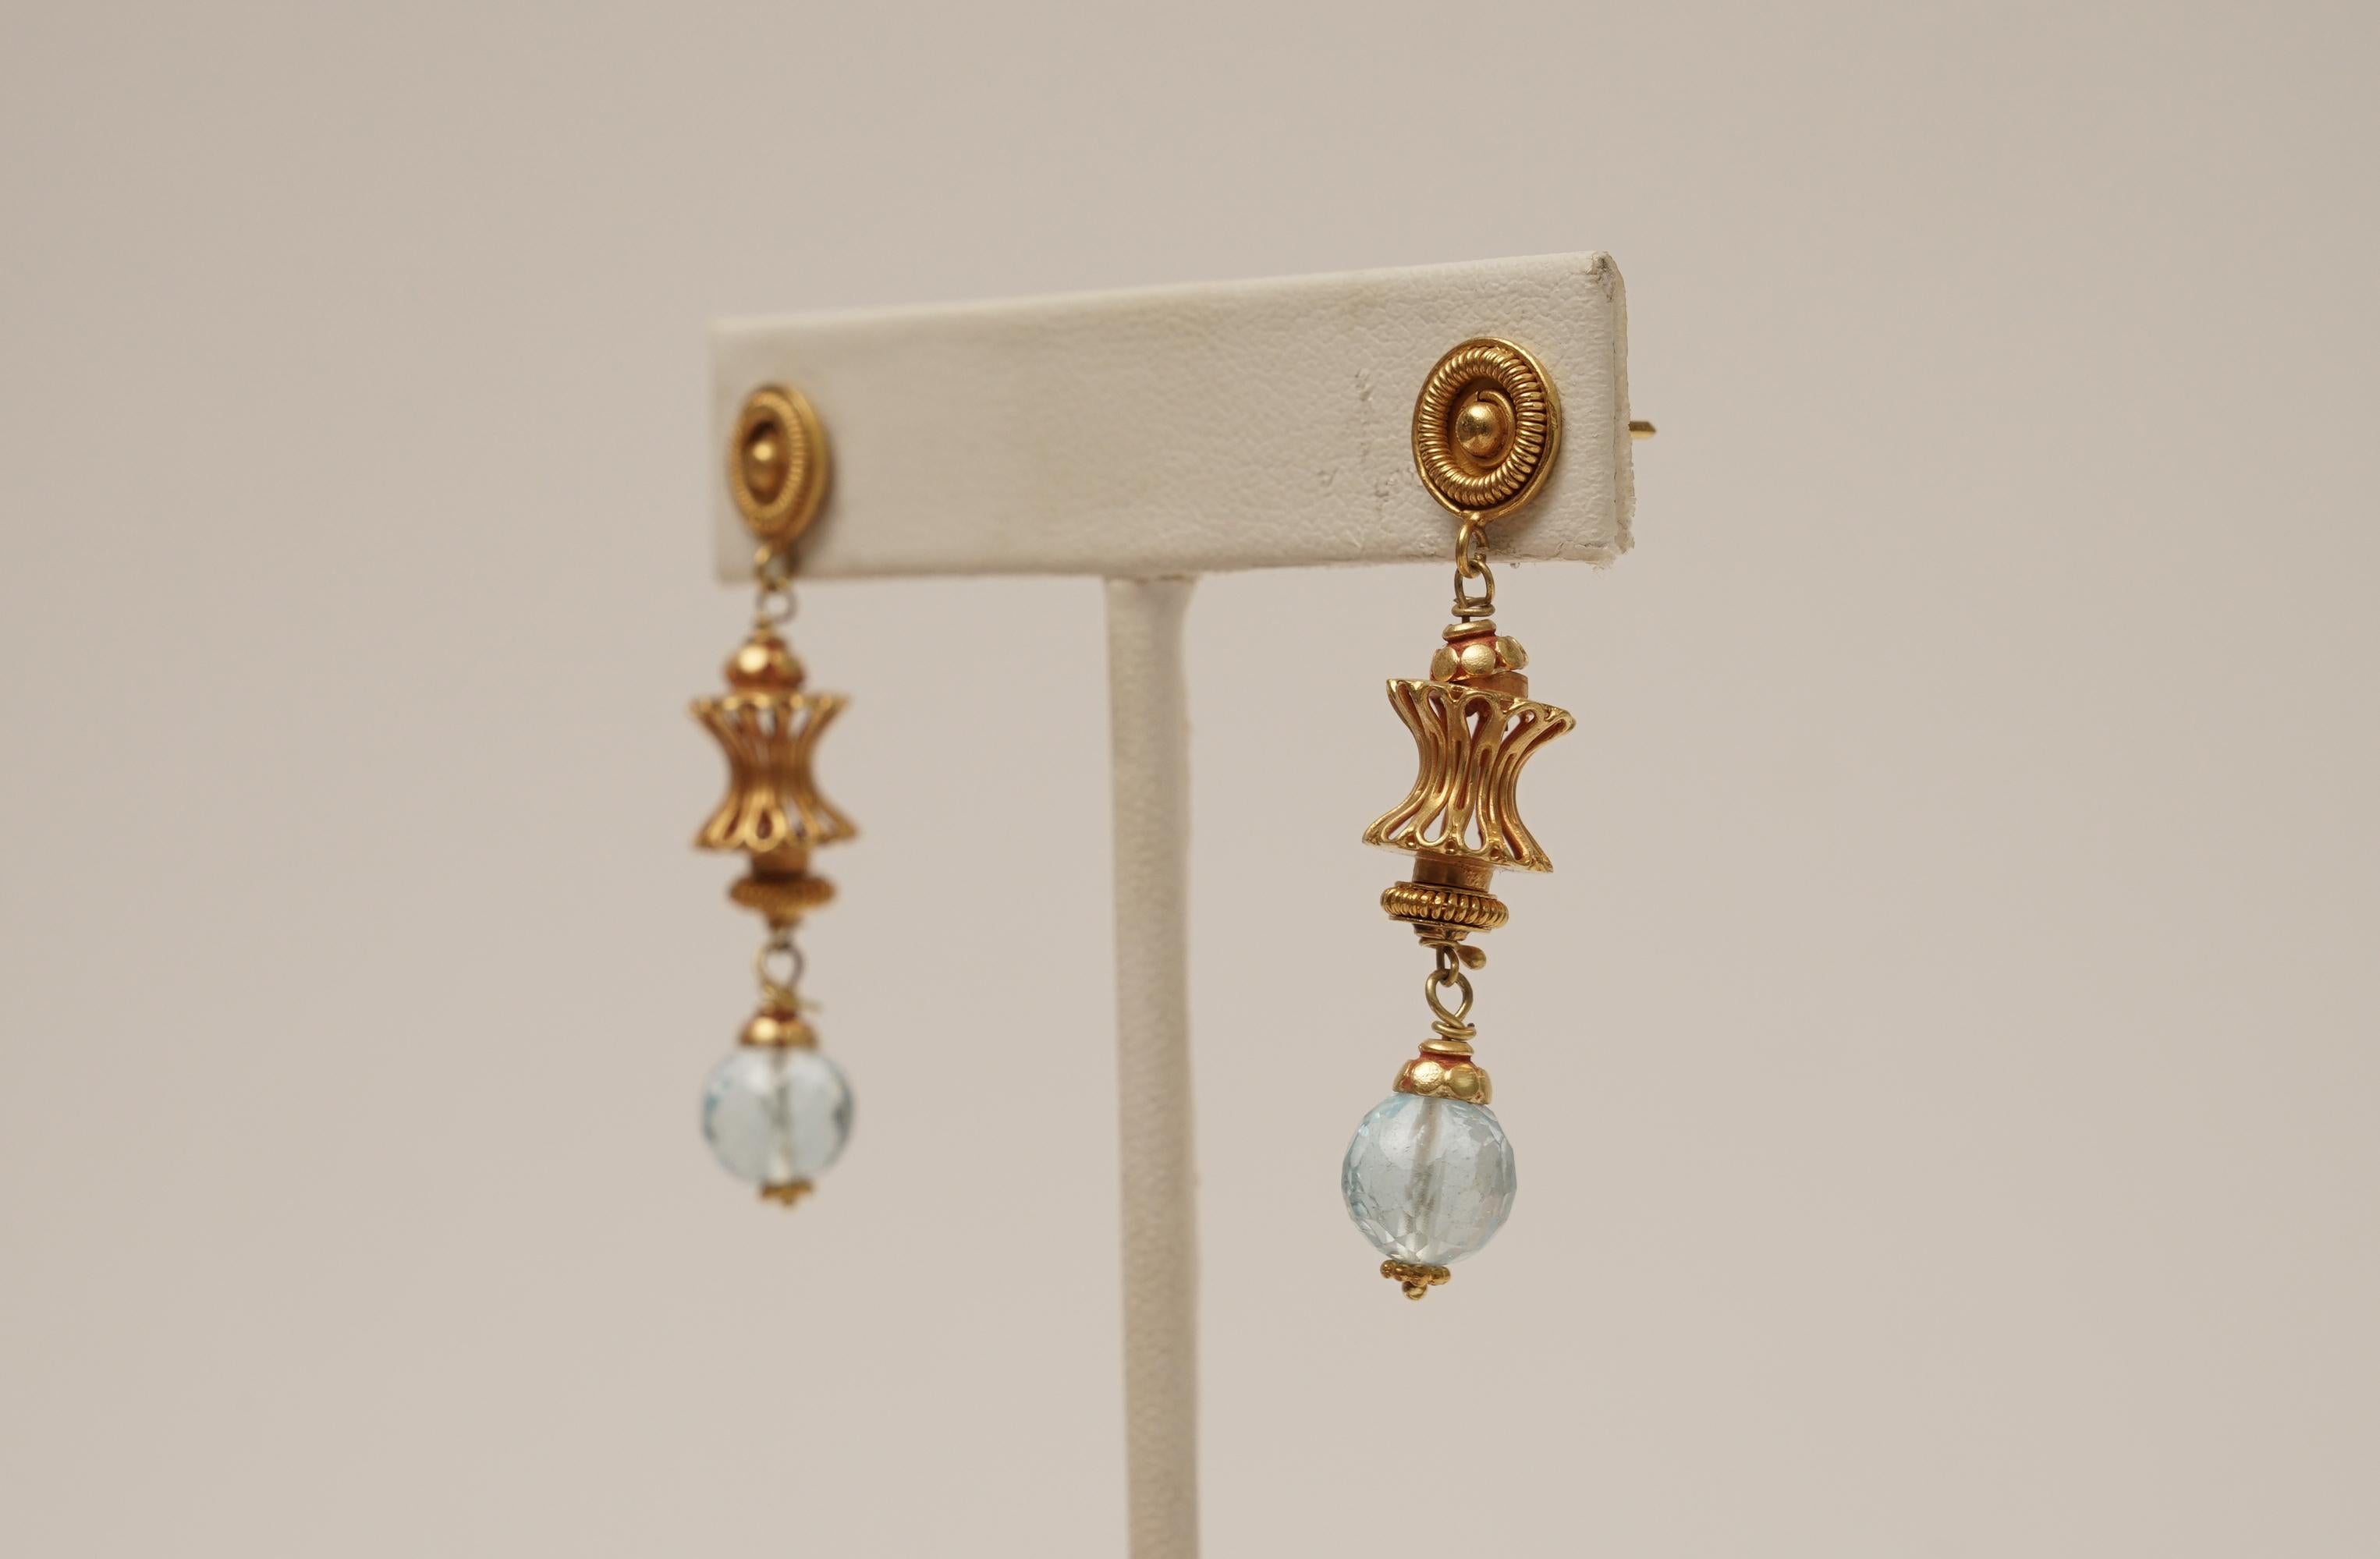 A pair of 18K gold dangle earrings with detailed granulation and wire work with a faceted, round aquamarine drop at the bottom.  18K Gold stud for pierced ears.  By Deborah Lockhart Phillips